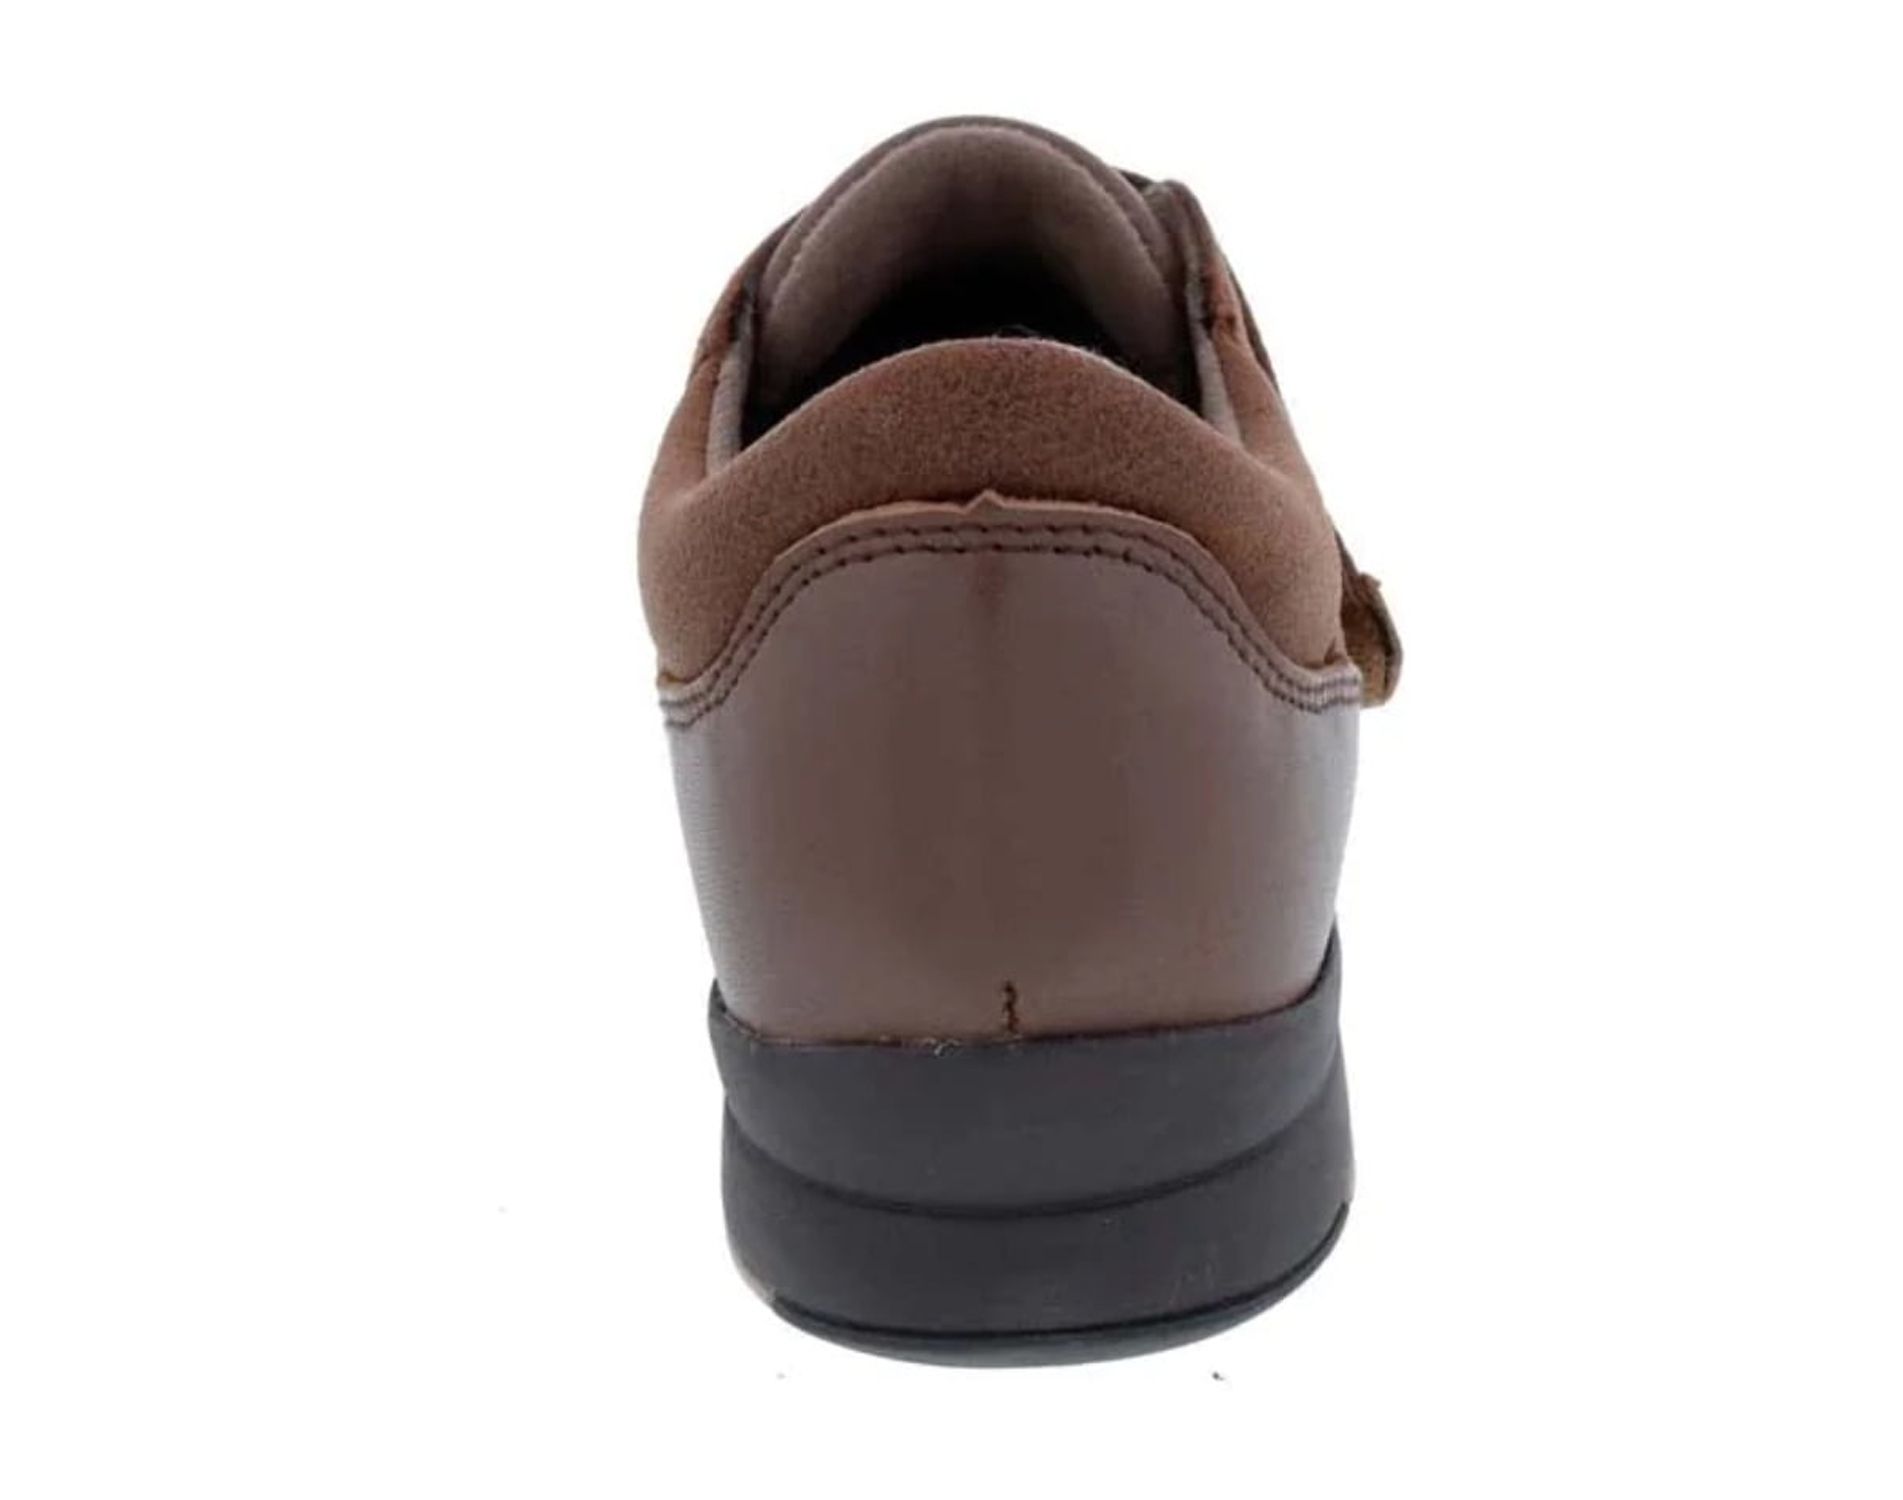 DREW MOONWALK WOMEN CASUAL SHOE IN BROWN STRETCH LEATHER - image 5 of 5